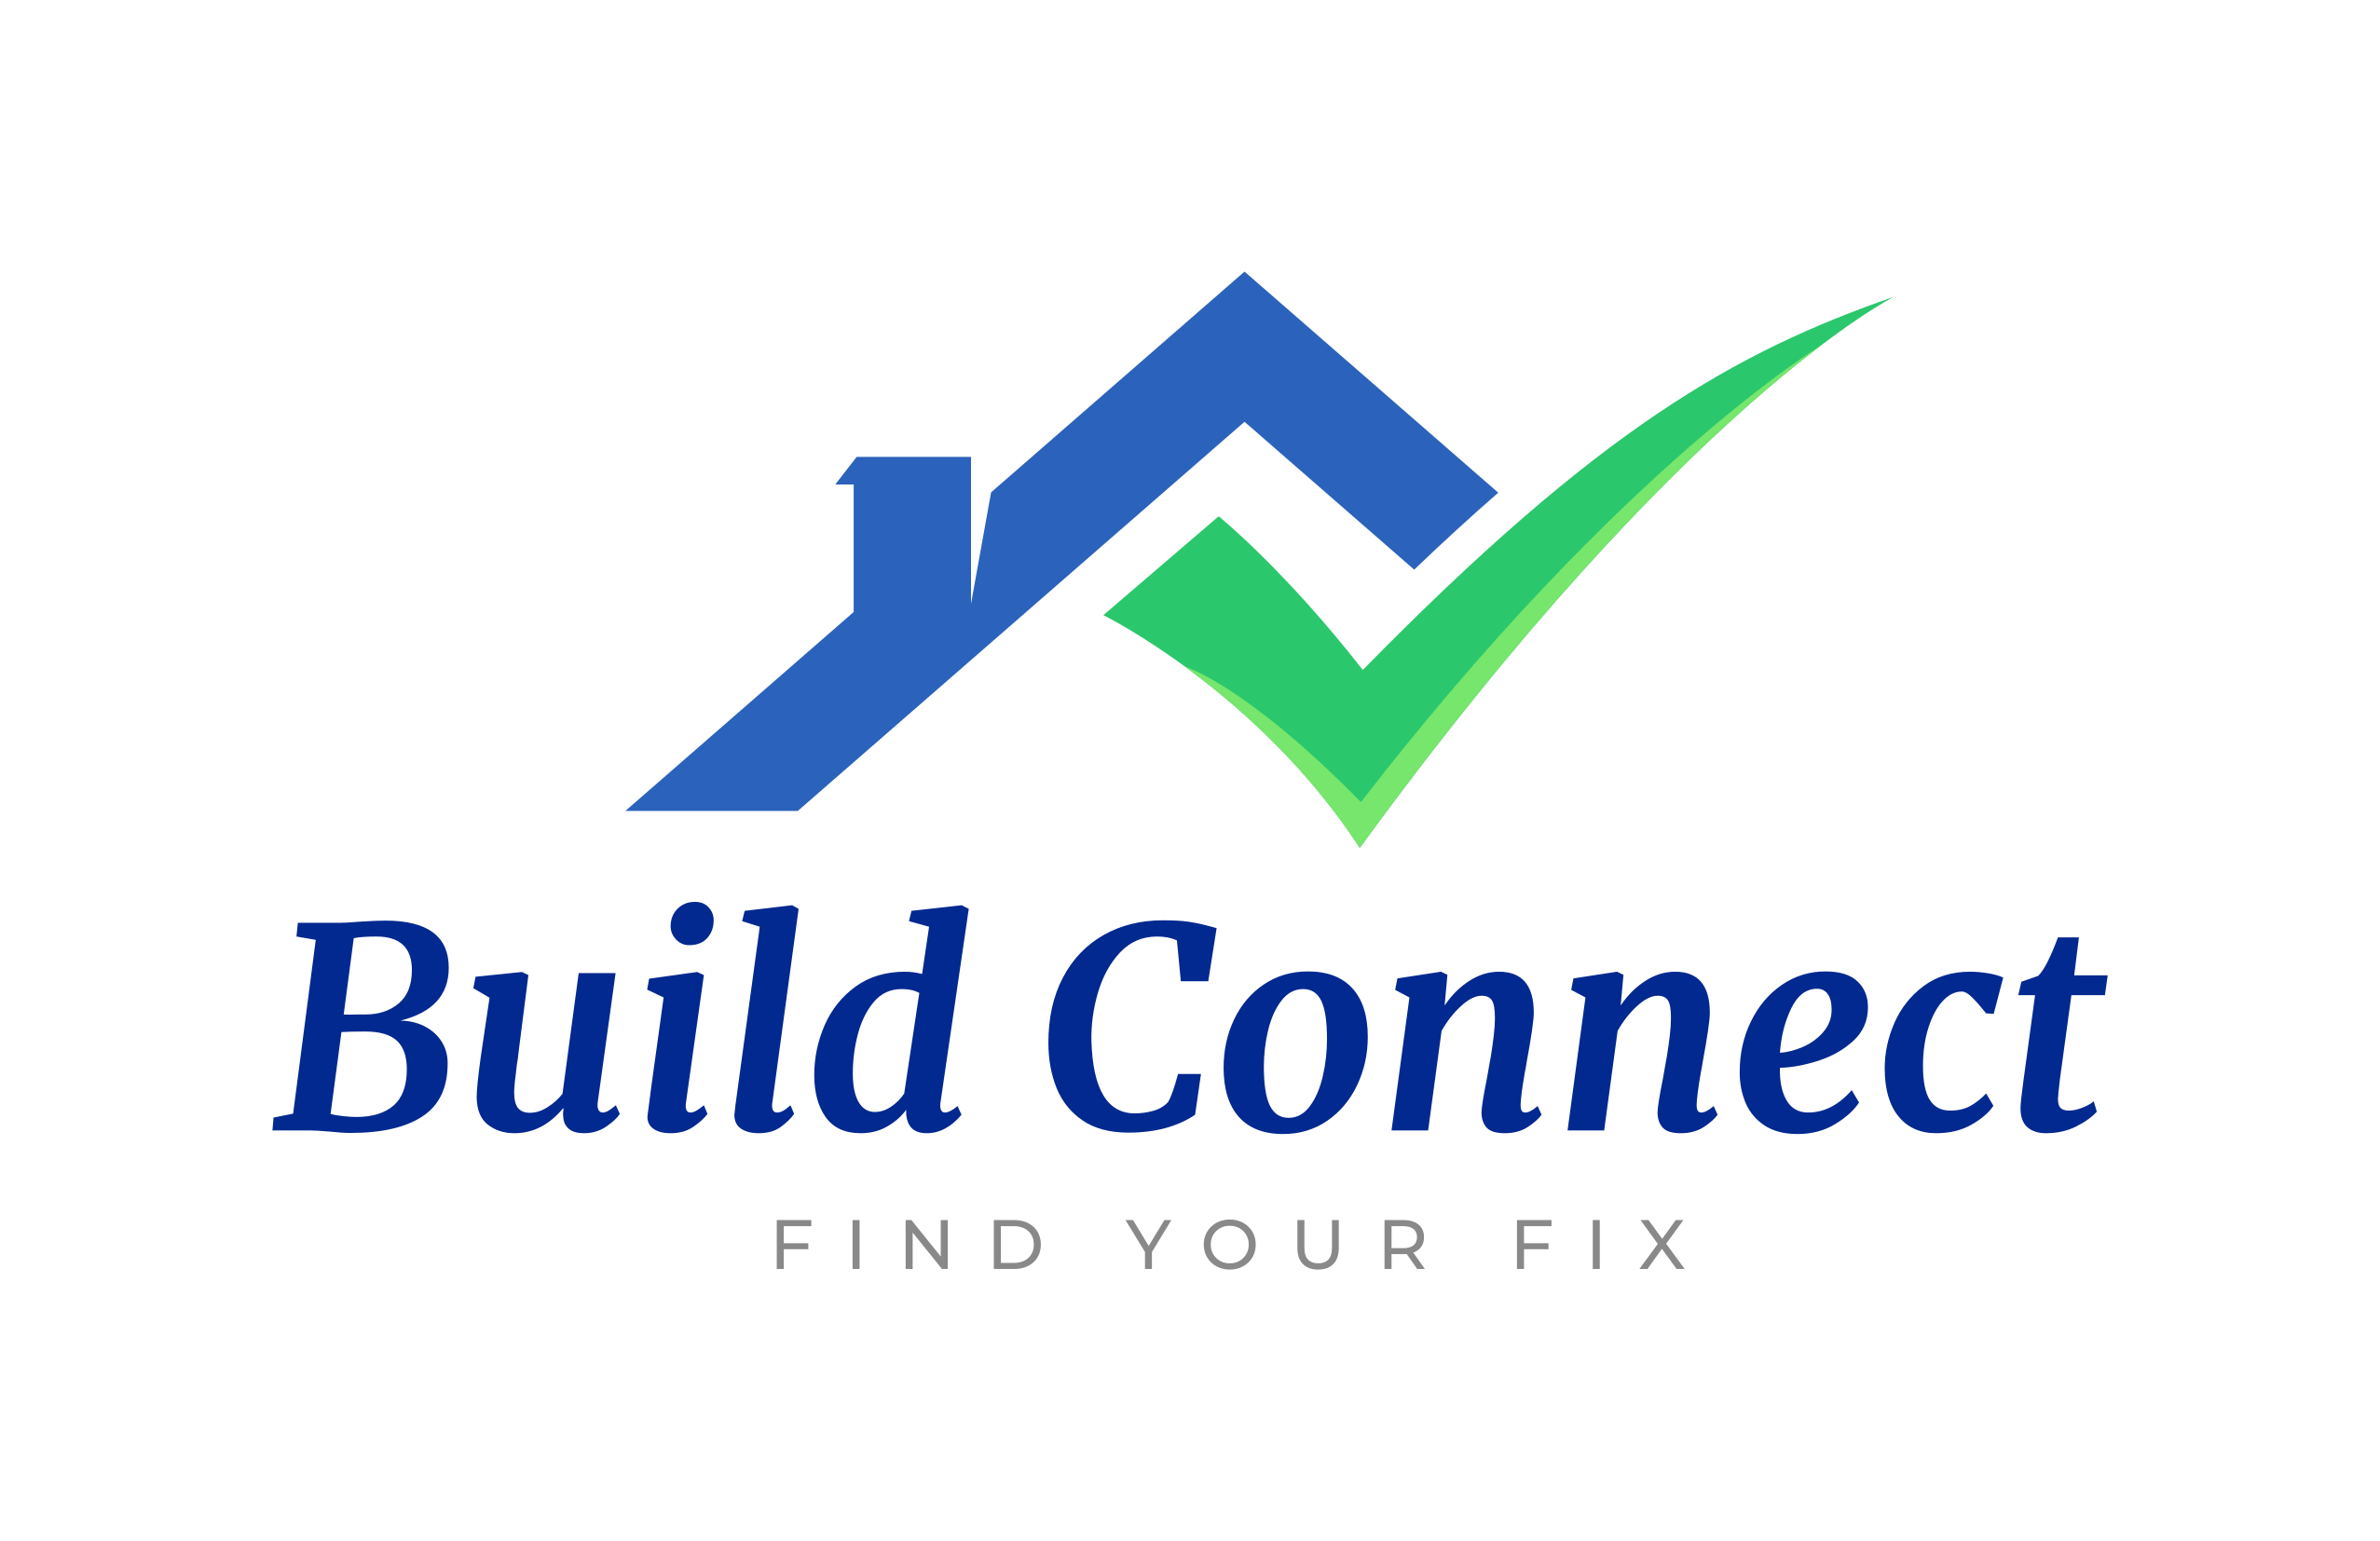 Simplistic logo where a checkmark is under a roof with the slogan "Find your fix" at the bottom under the centered business name: Build Connect.